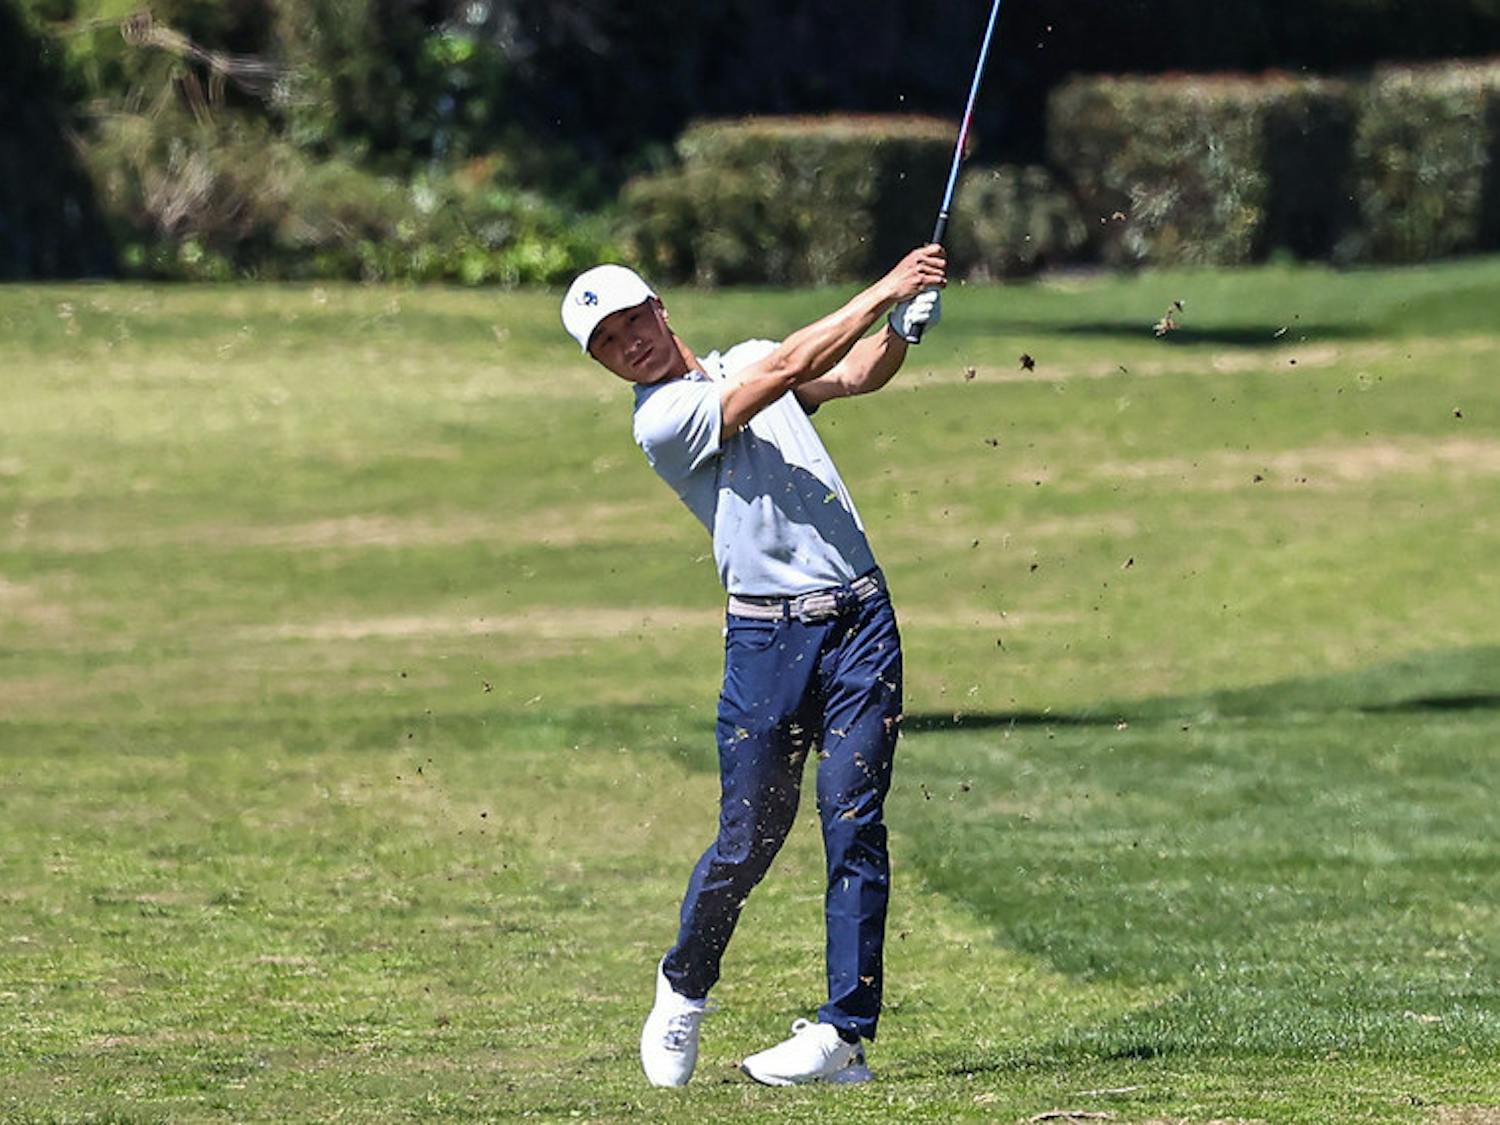 (1) WWU men’s golf is firing on all cylinders after a tournament victory and strong performance at West Regional Preview